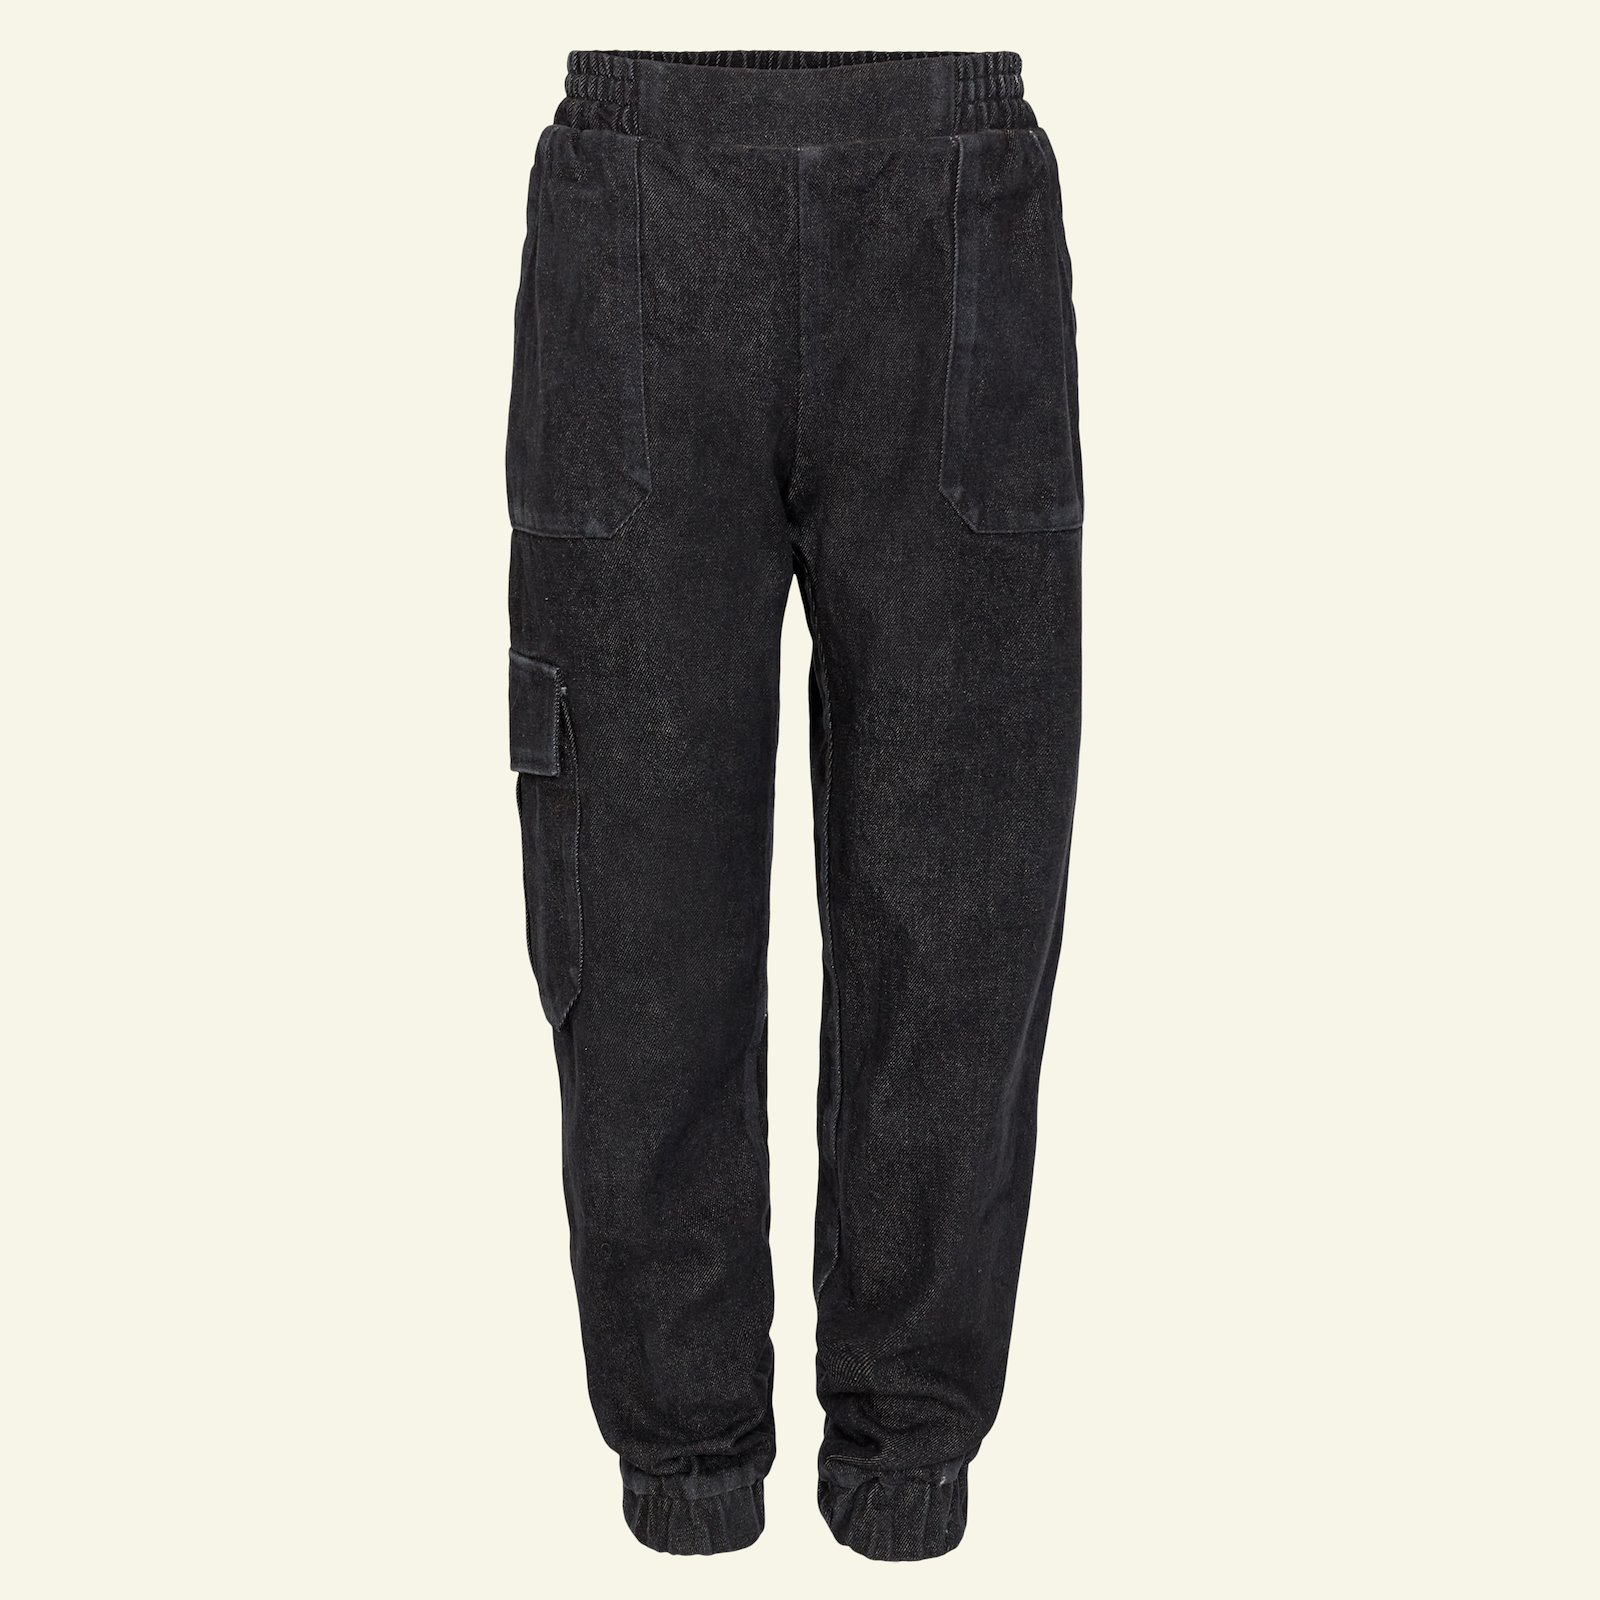 Cargo trousers, 122/7y p60037_5343_sskit